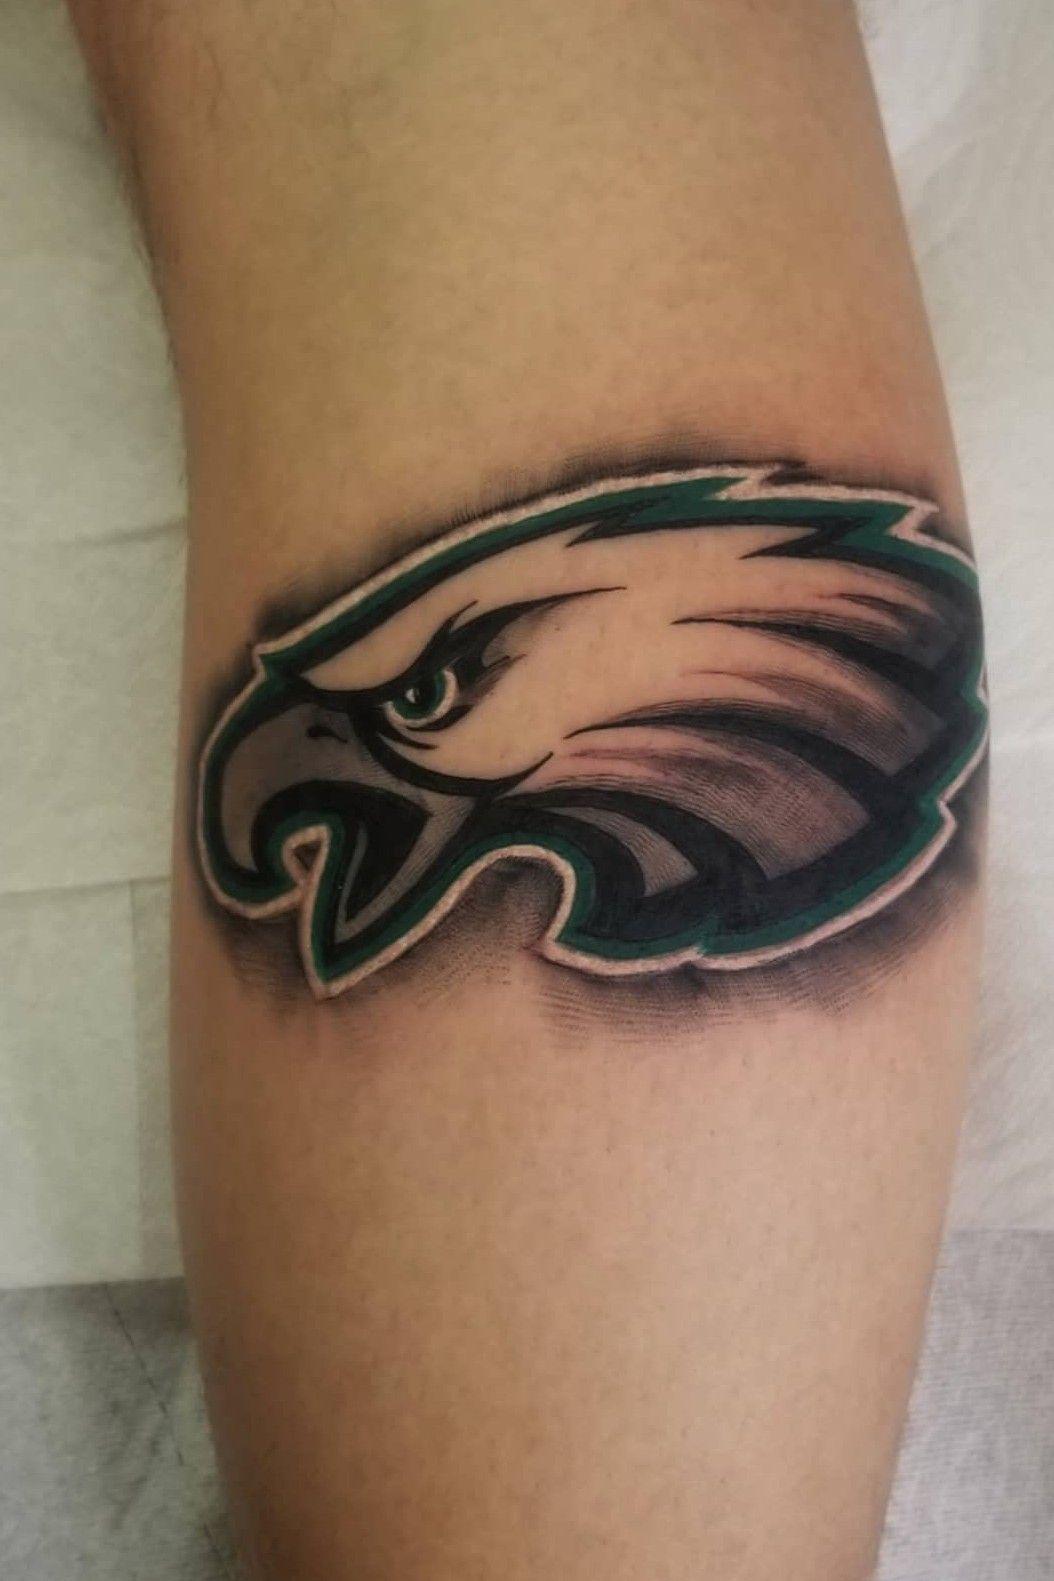 45 Philadelphia Eagles Tattoo Stock Photos HighRes Pictures and Images   Getty Images